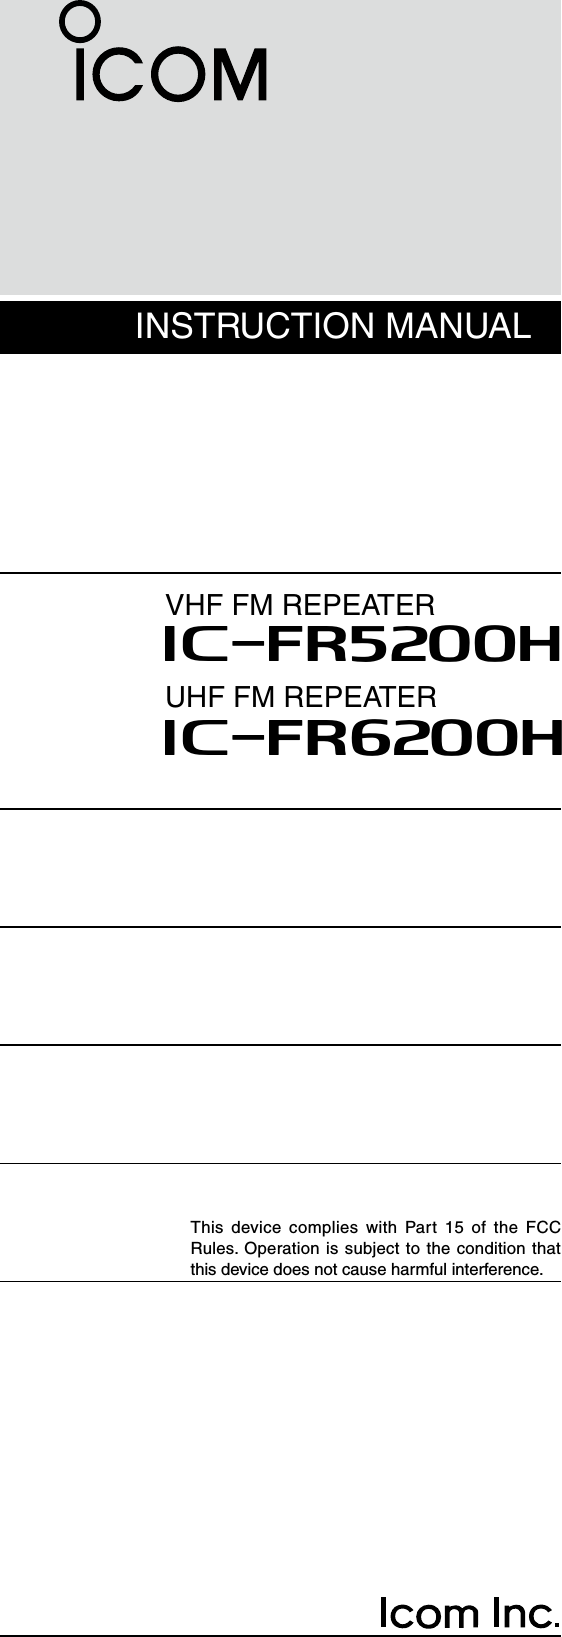 INSTRUCTION MANUALVHF FM REPEATERiFR5200HiFR6200HUHF FM REPEATERThis  device complies with Part  15  of  the  FCC Rules. Operation is subject to the condition that this device does not cause harmful interference.